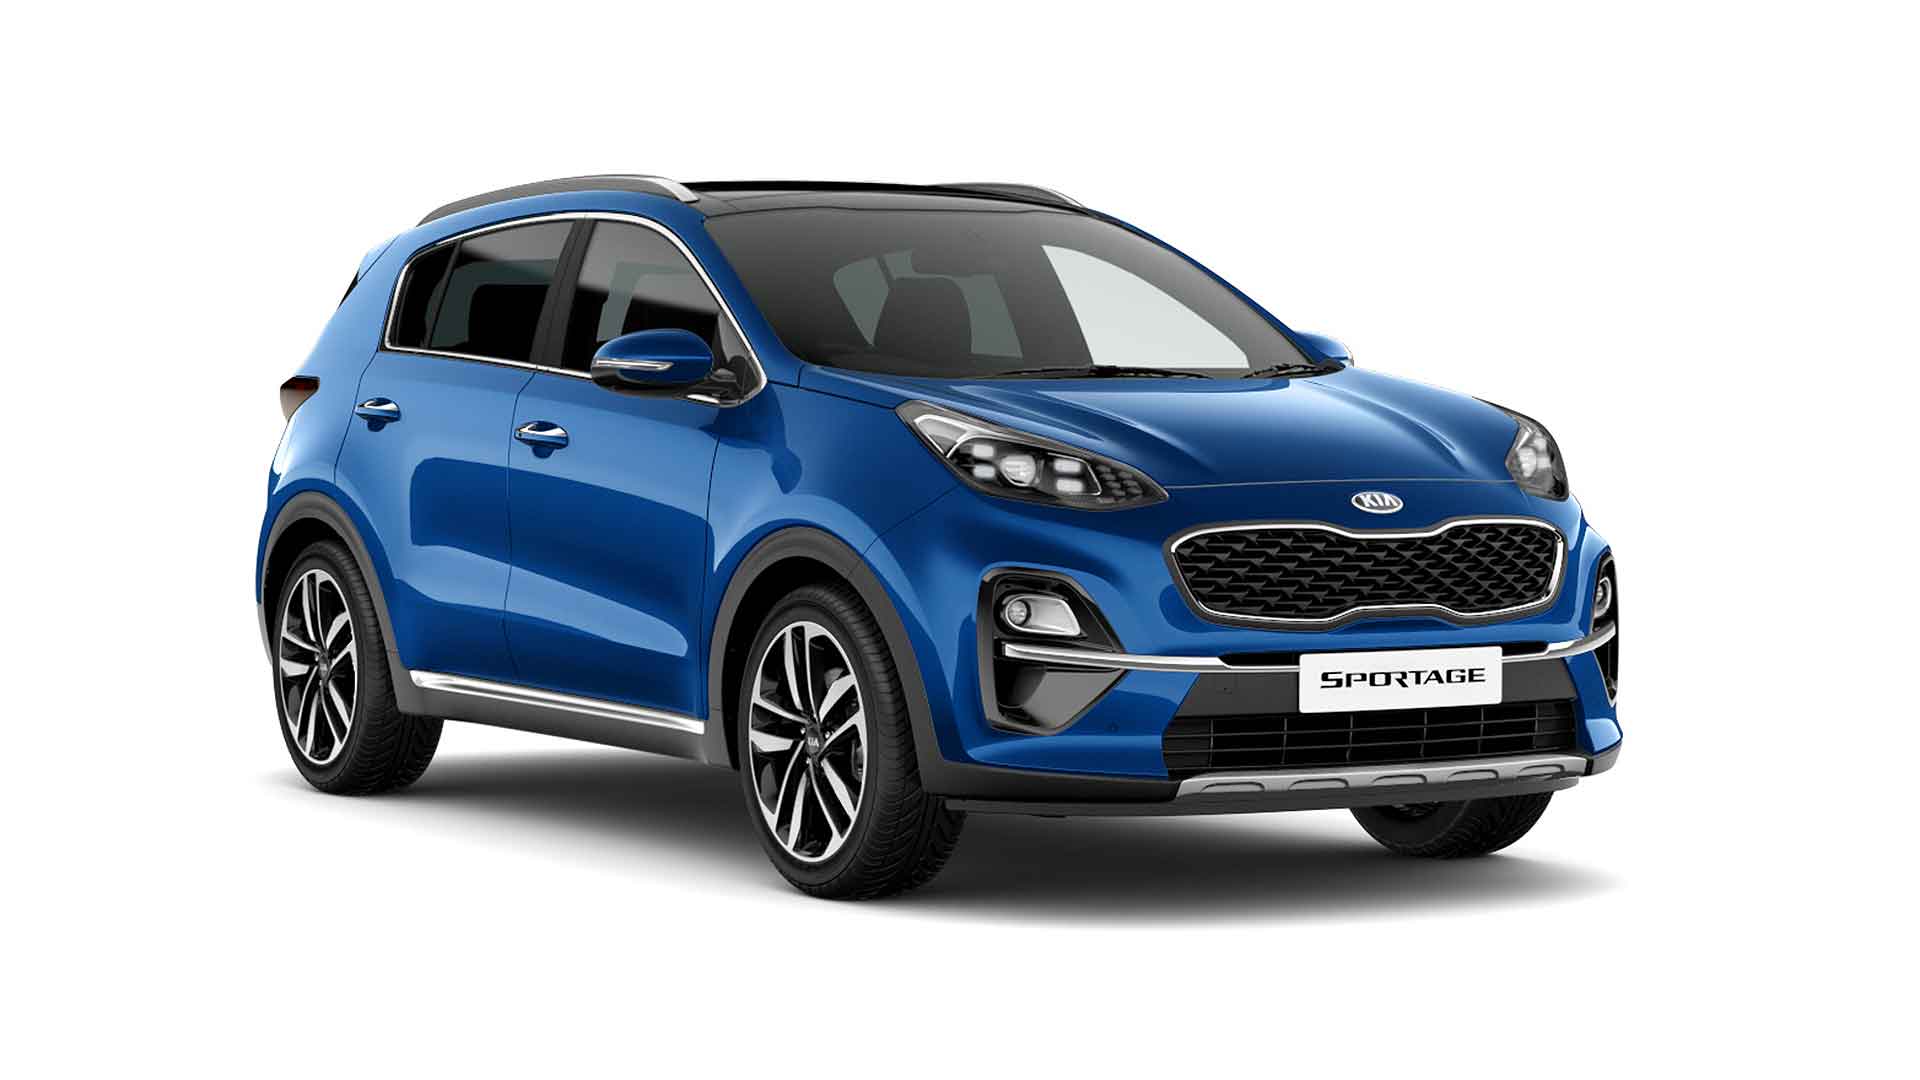 Kia Sportage Update Prices Specs And Ordering Dates Motoring Research